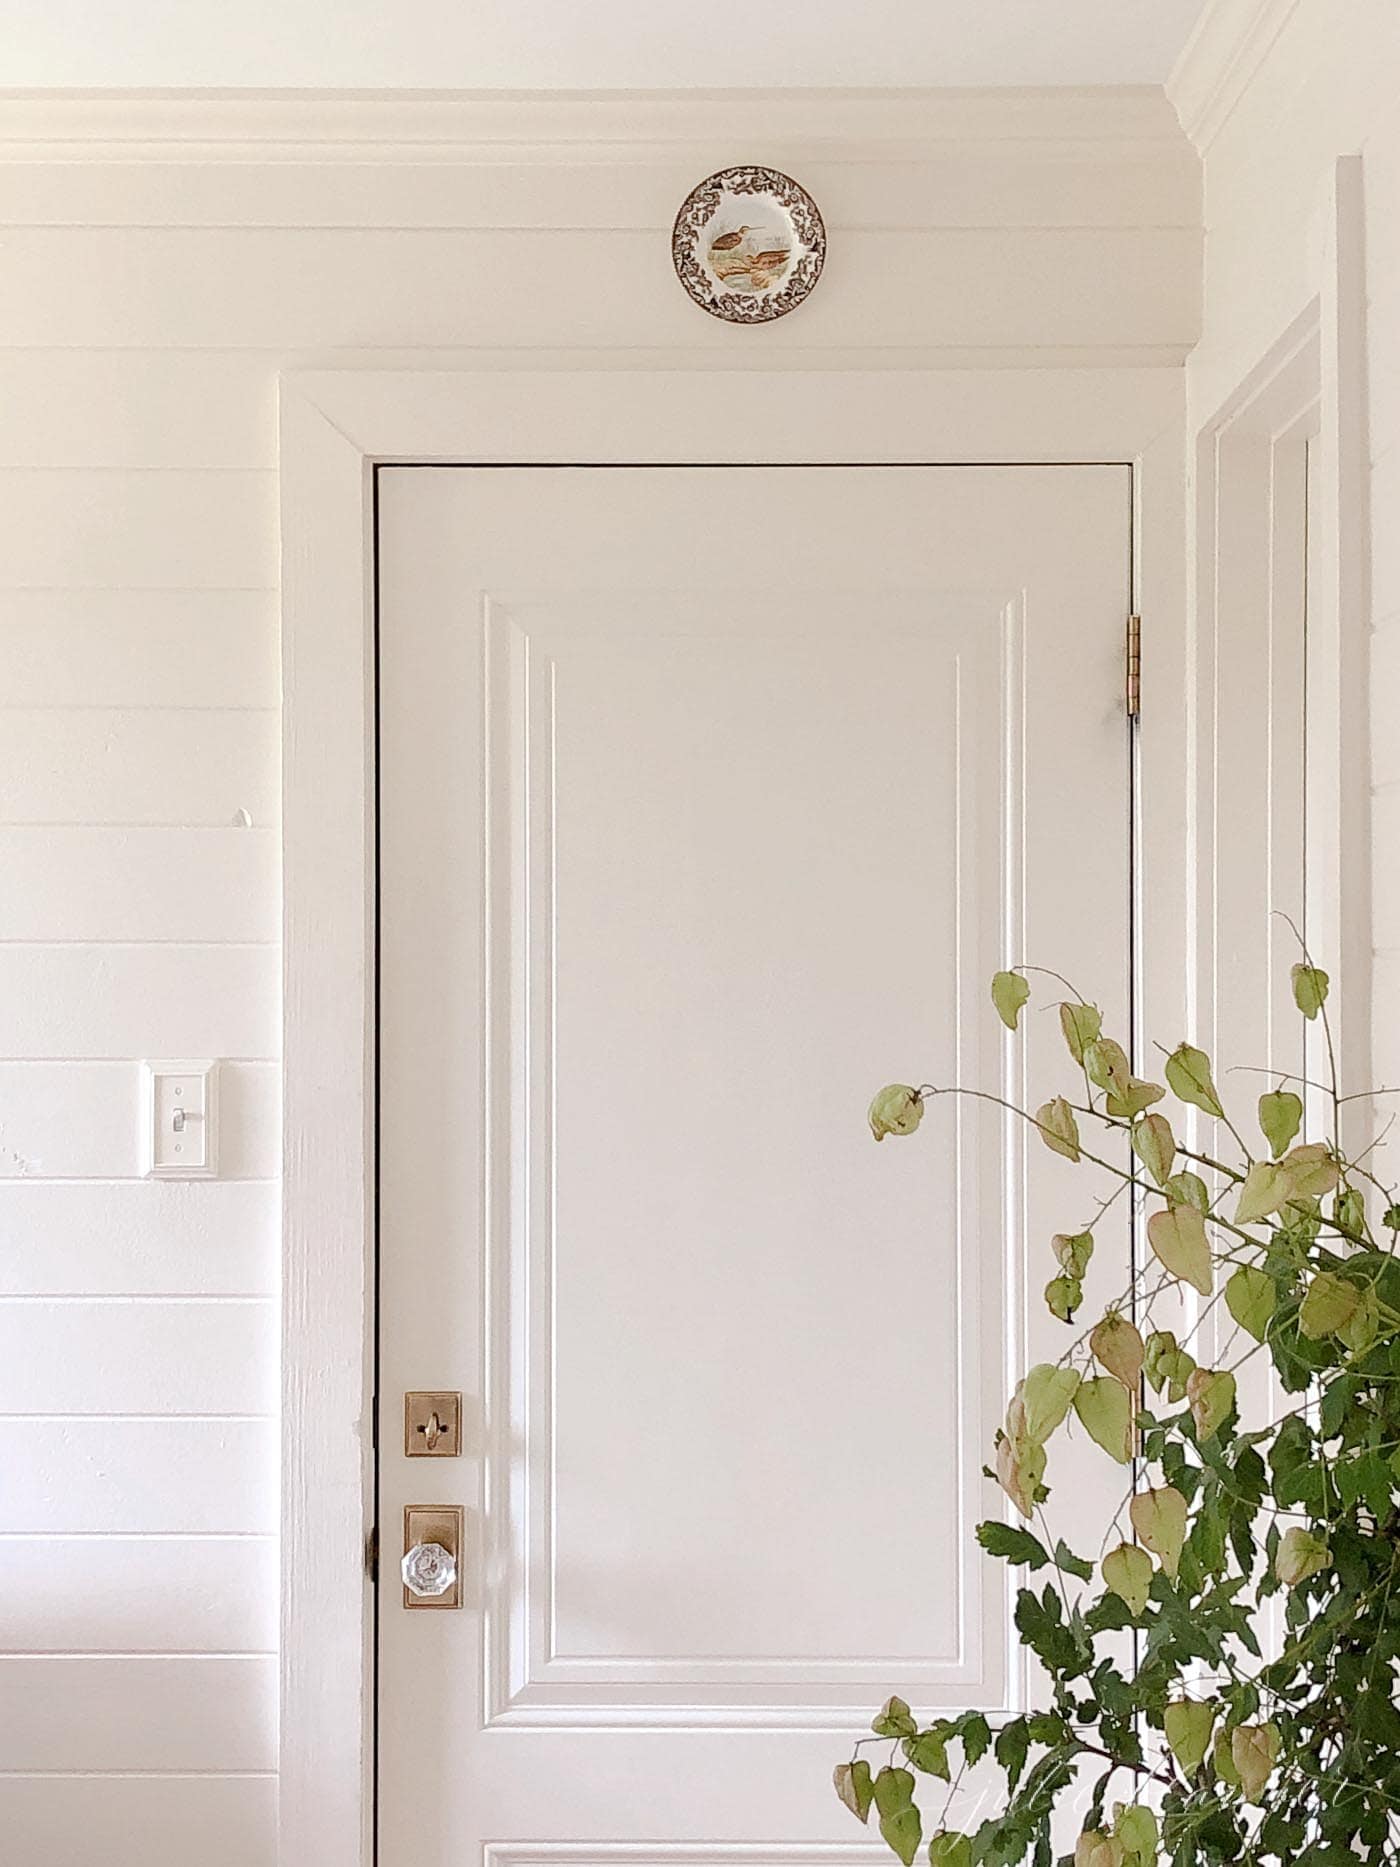 A mudroom with horizontal cream painted wood paneling.